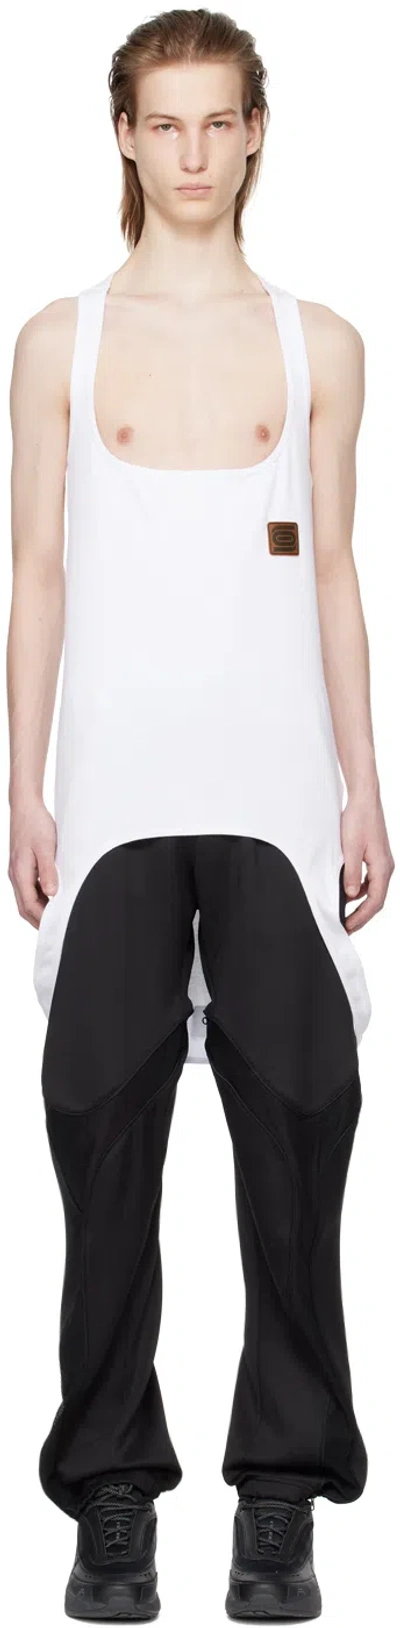 Olly Shinder White Upside Down Tank Top In White Rib